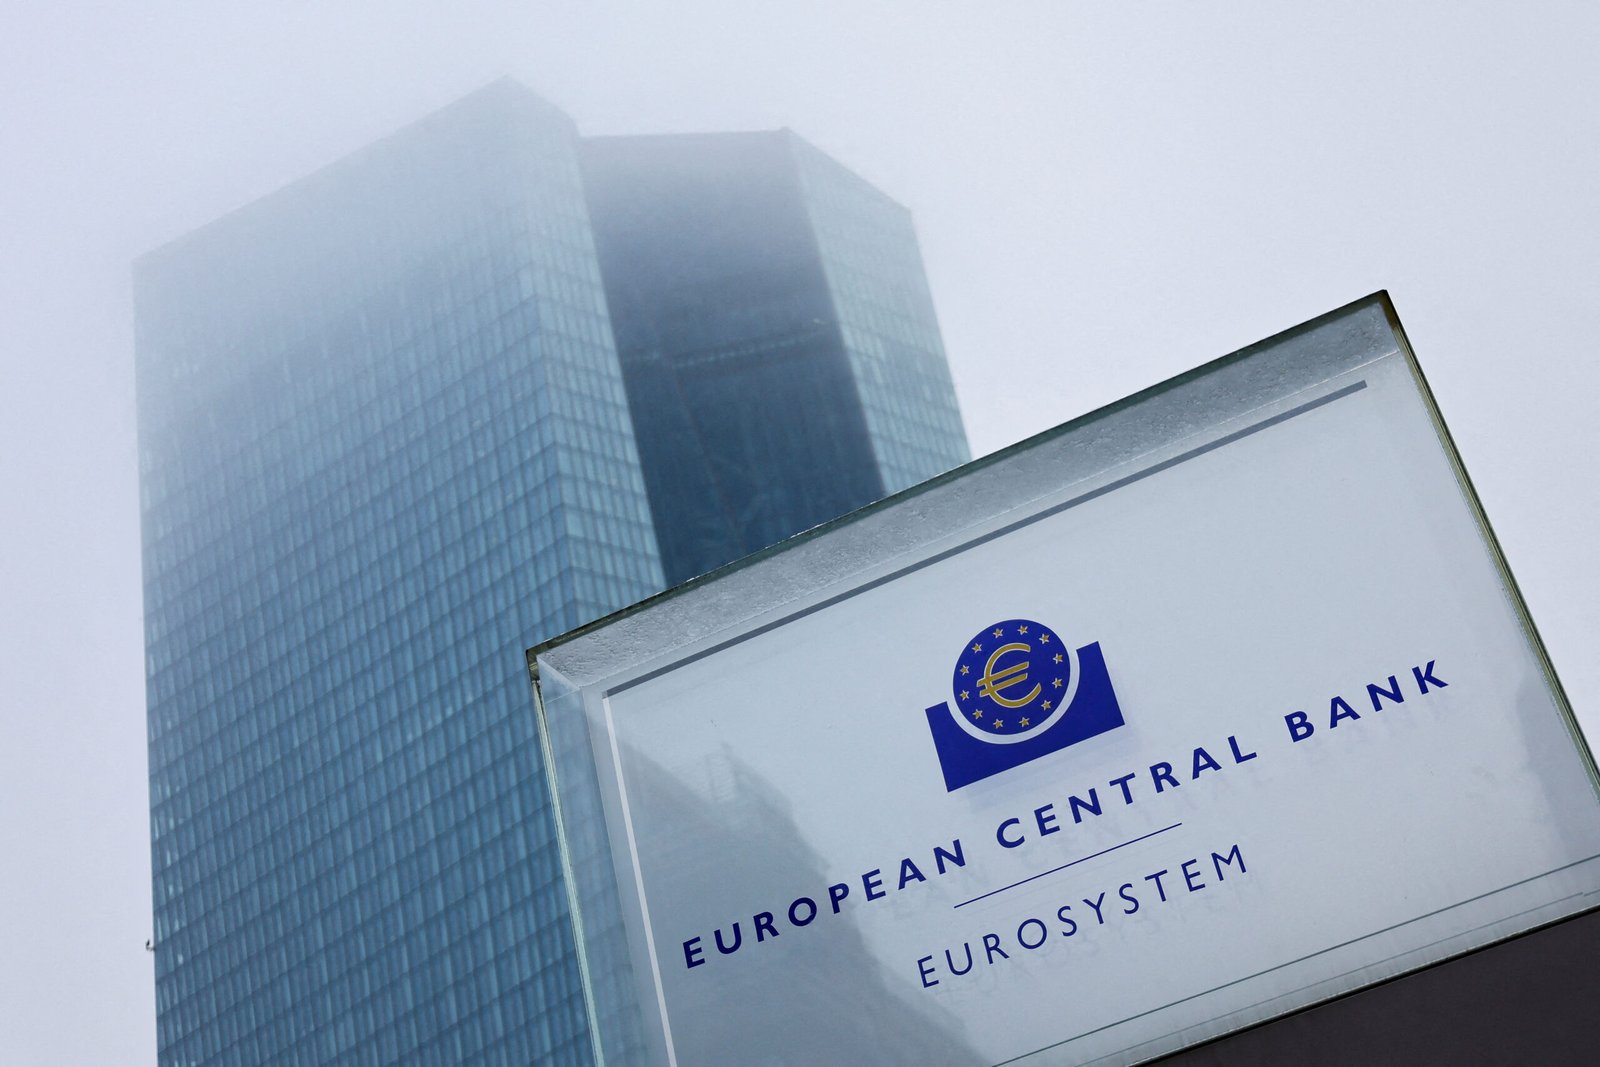 momentum-growing-for-ecb-rate-hike-pause-as-growth-falters-sources